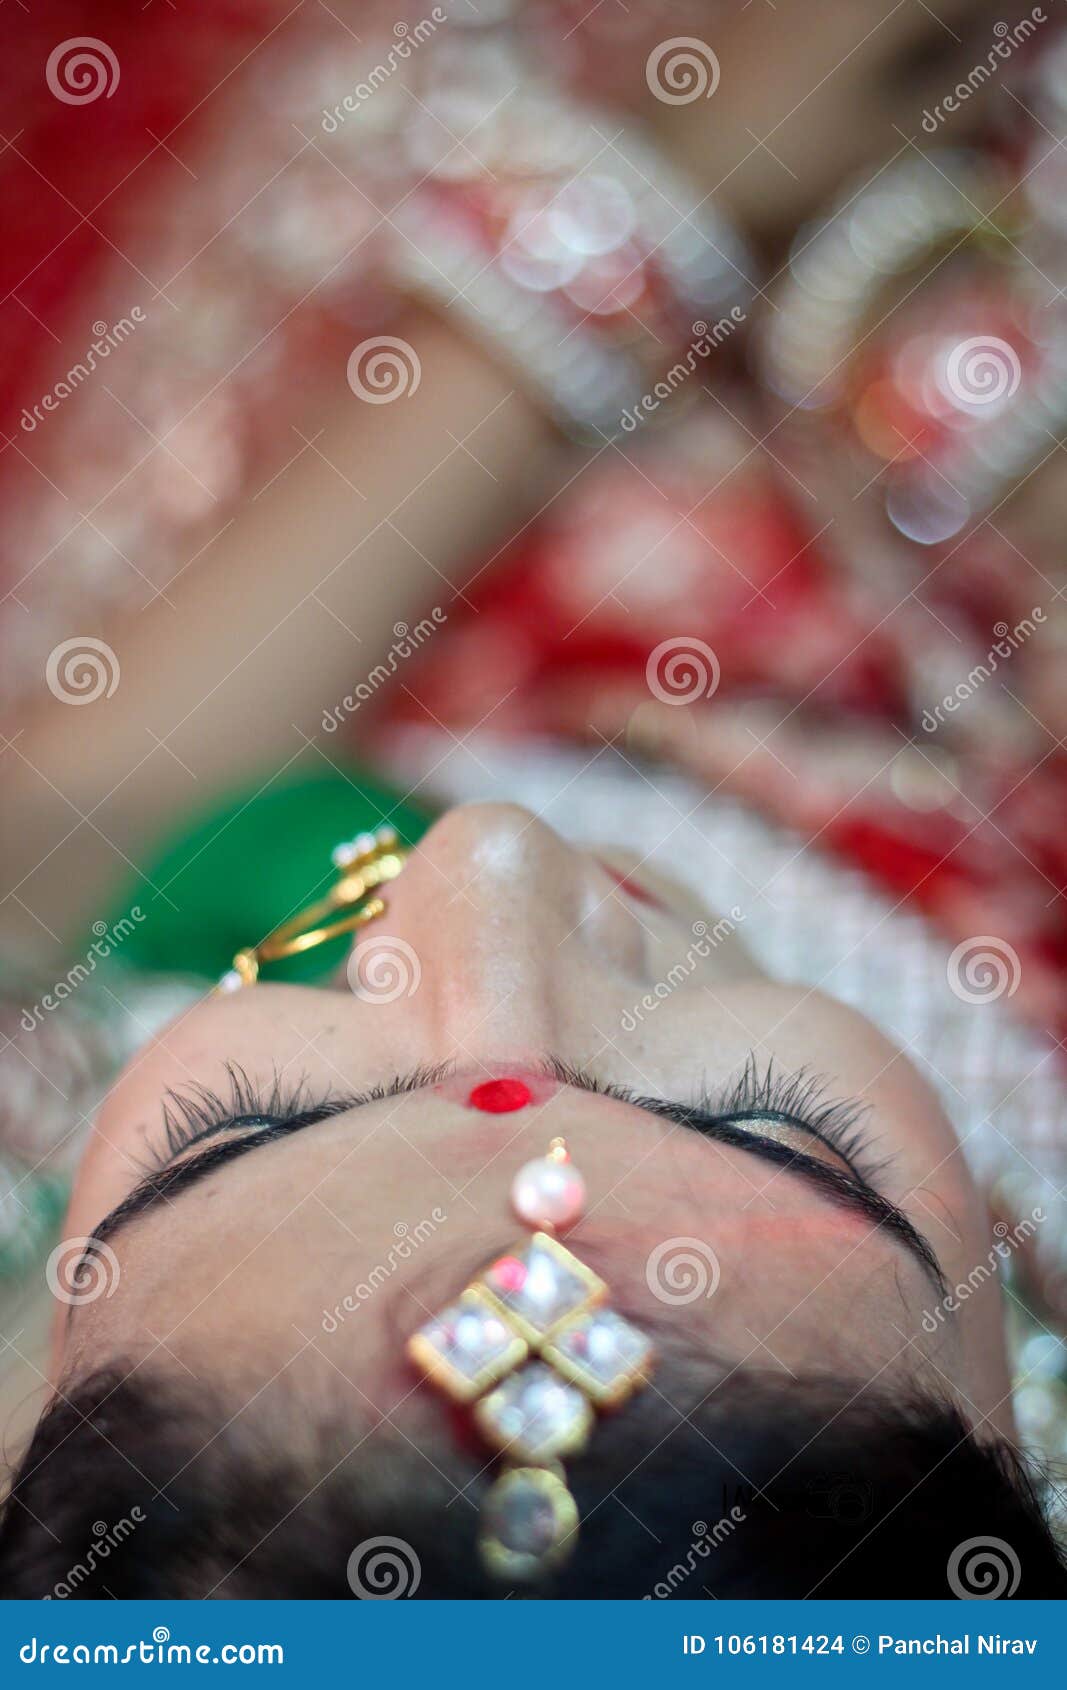 Girl close up portrait stock image. Image of hand, posing - 77193789